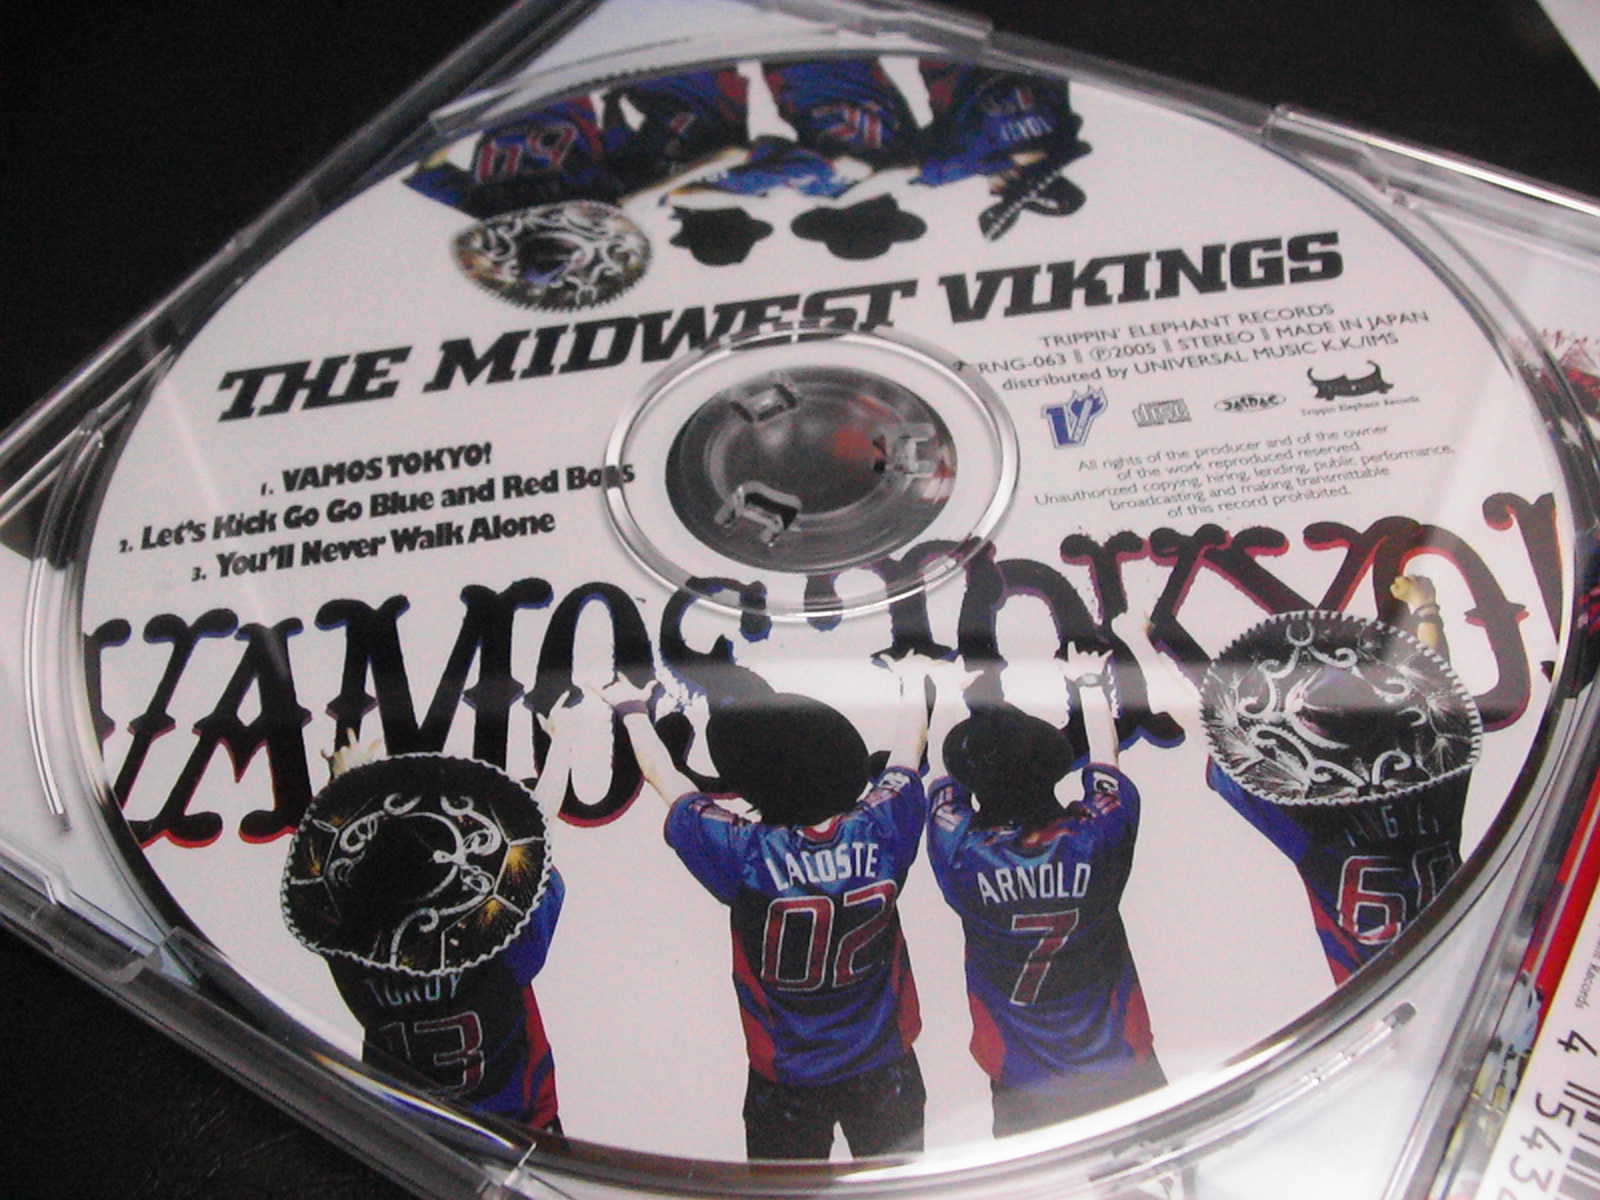 THE MIDWEST VIKINGS